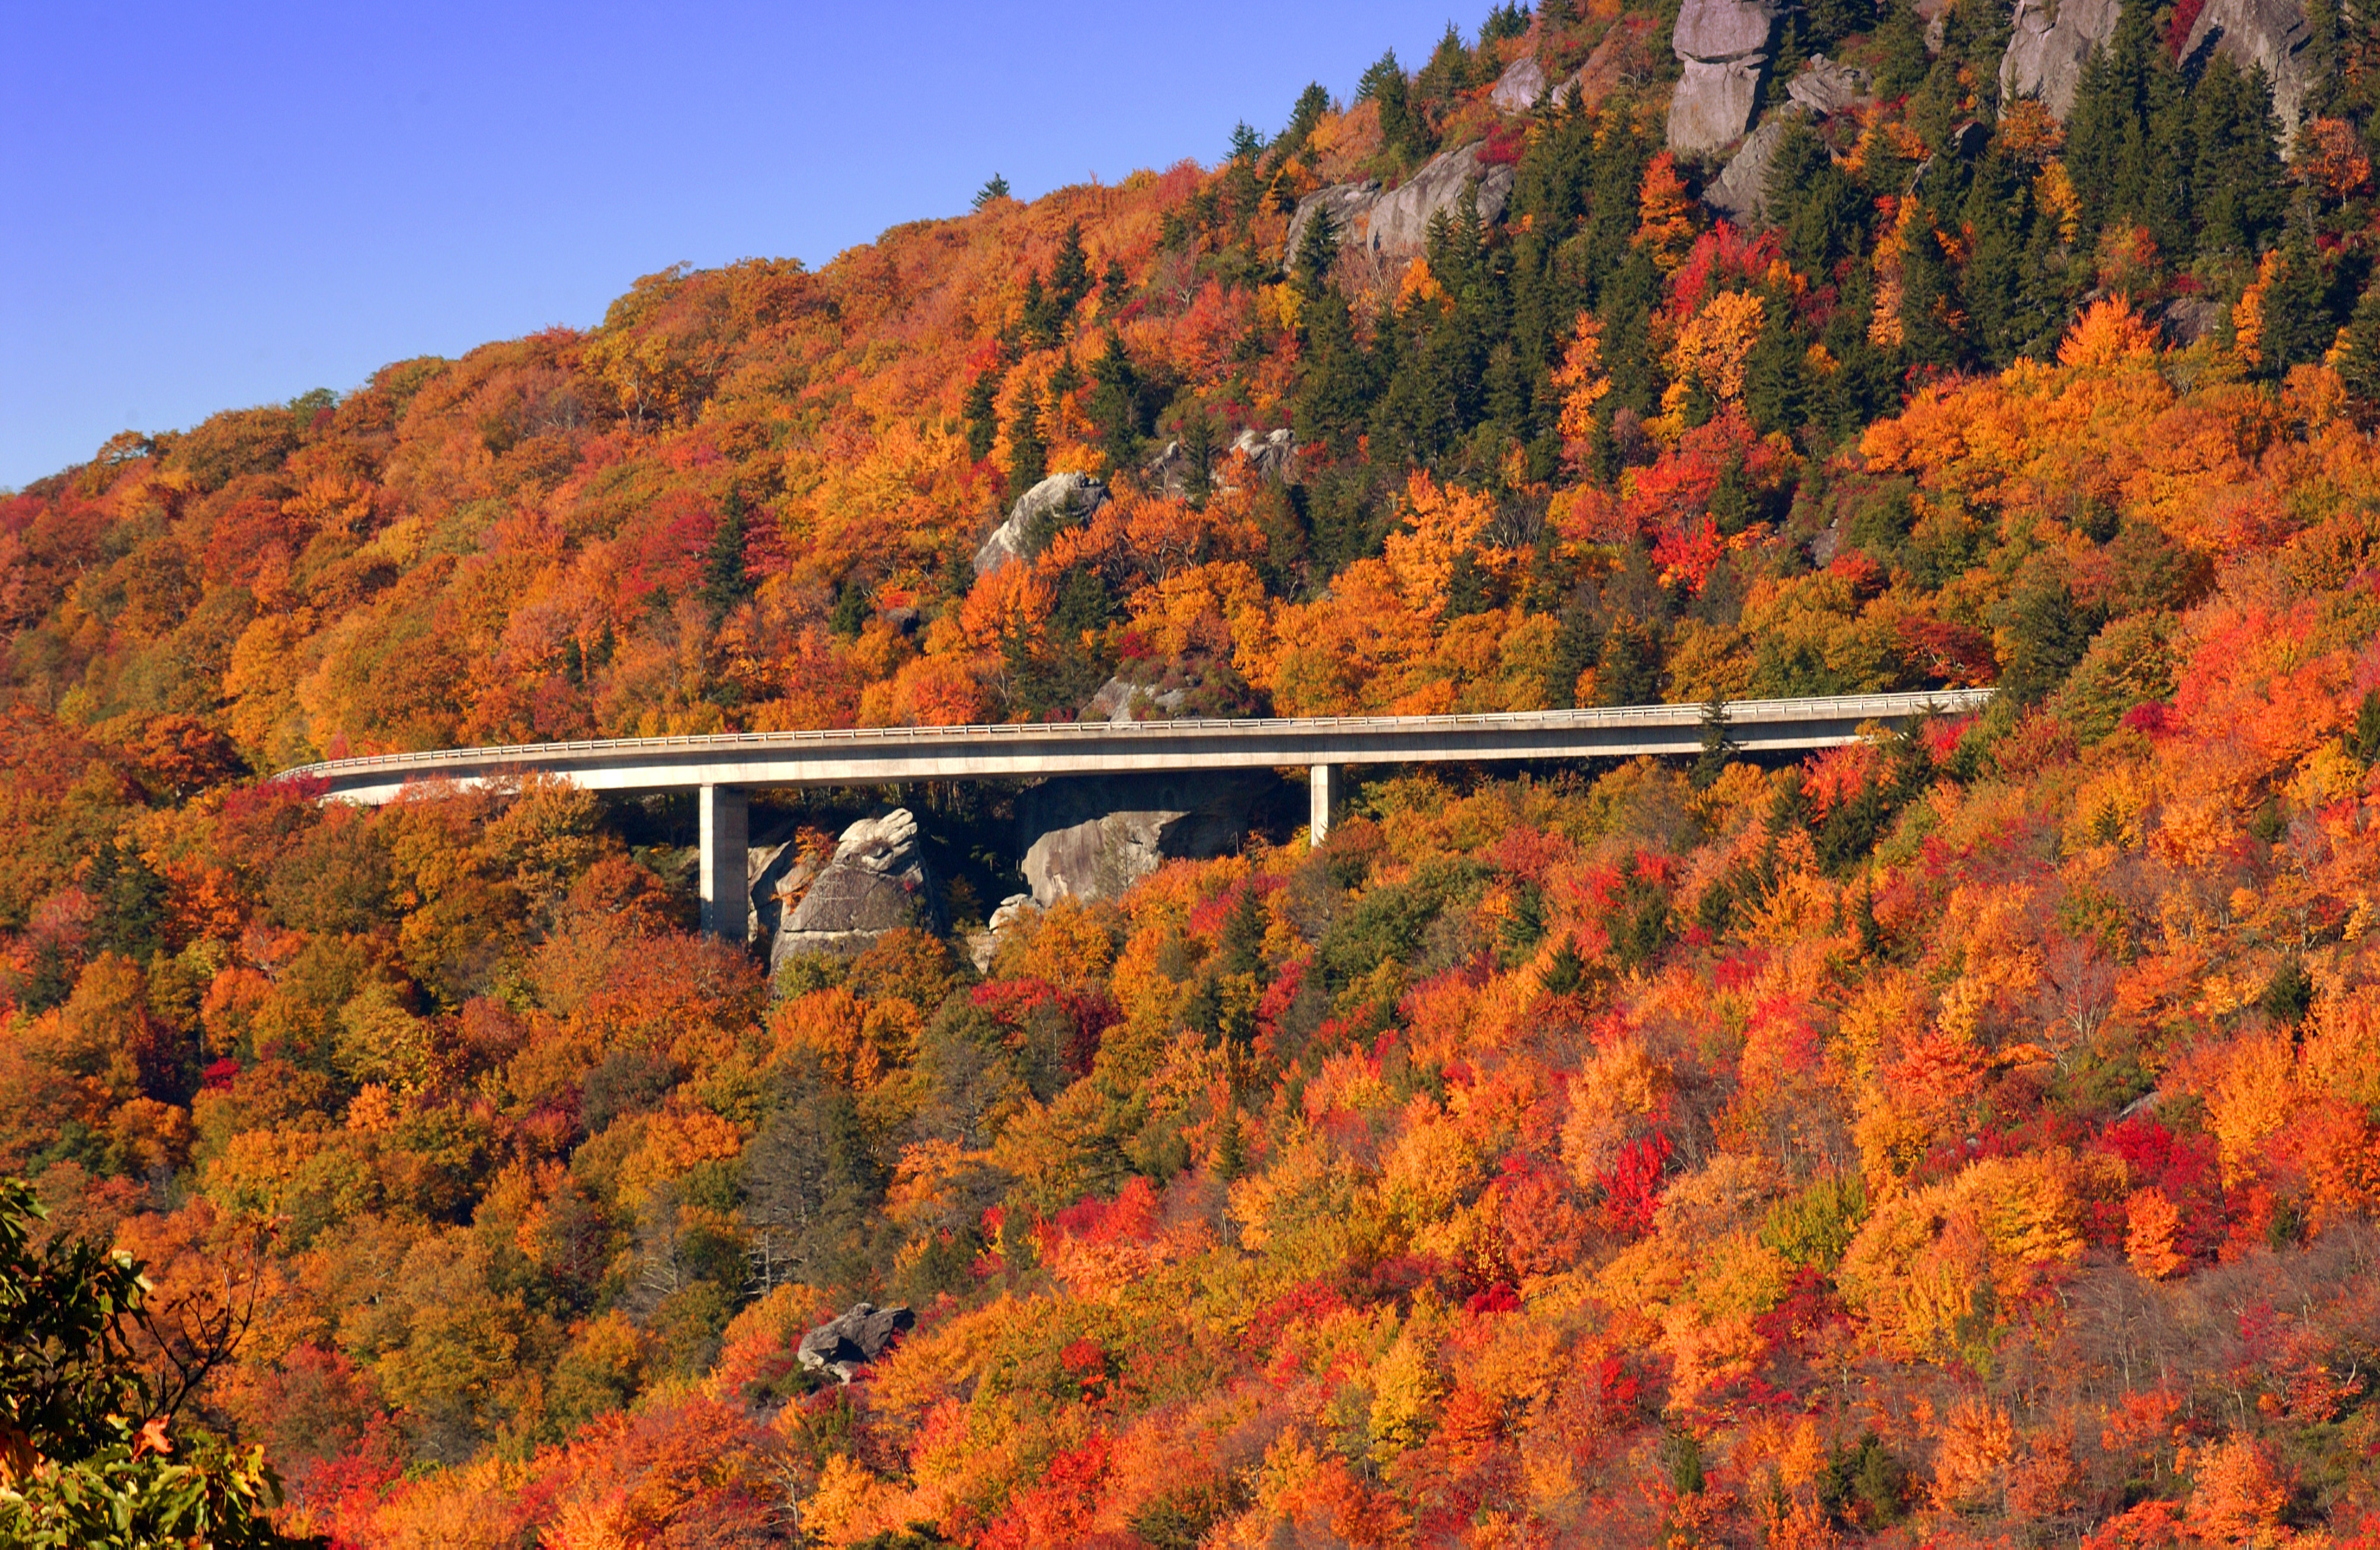 The Linn Cove Viaduct crosses fall foliage on the Blue Ridge Parkway in North Carollina. (Chicago Tribune—MCT via Getty Images)